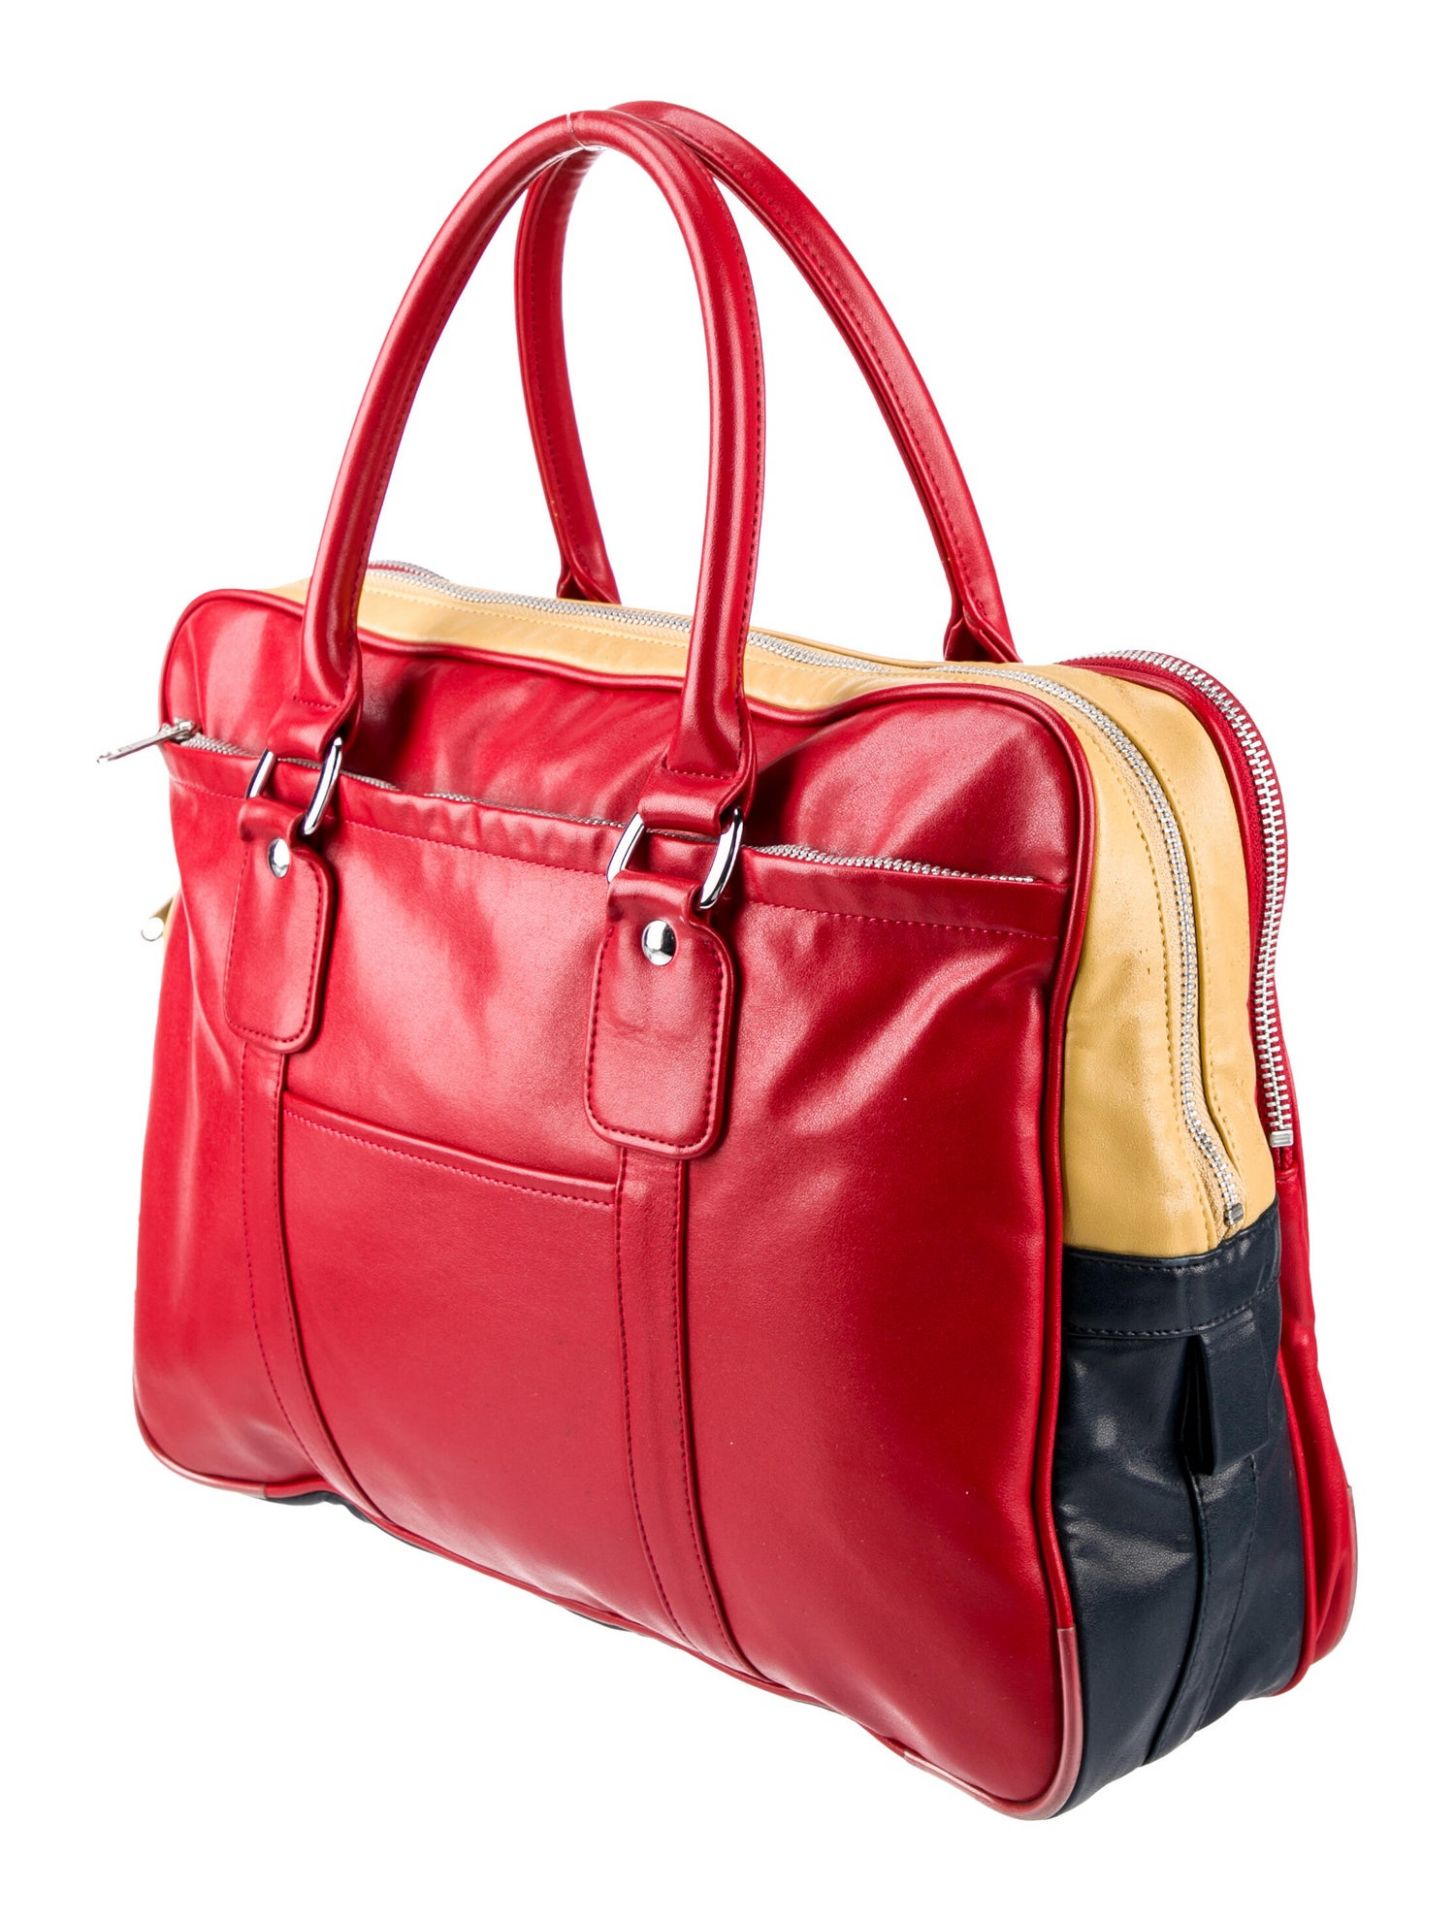 Comme Des GarÃ§ons Briefcase in Red Artificial Leather â€“ NEW â€“ RRP Â£175 !